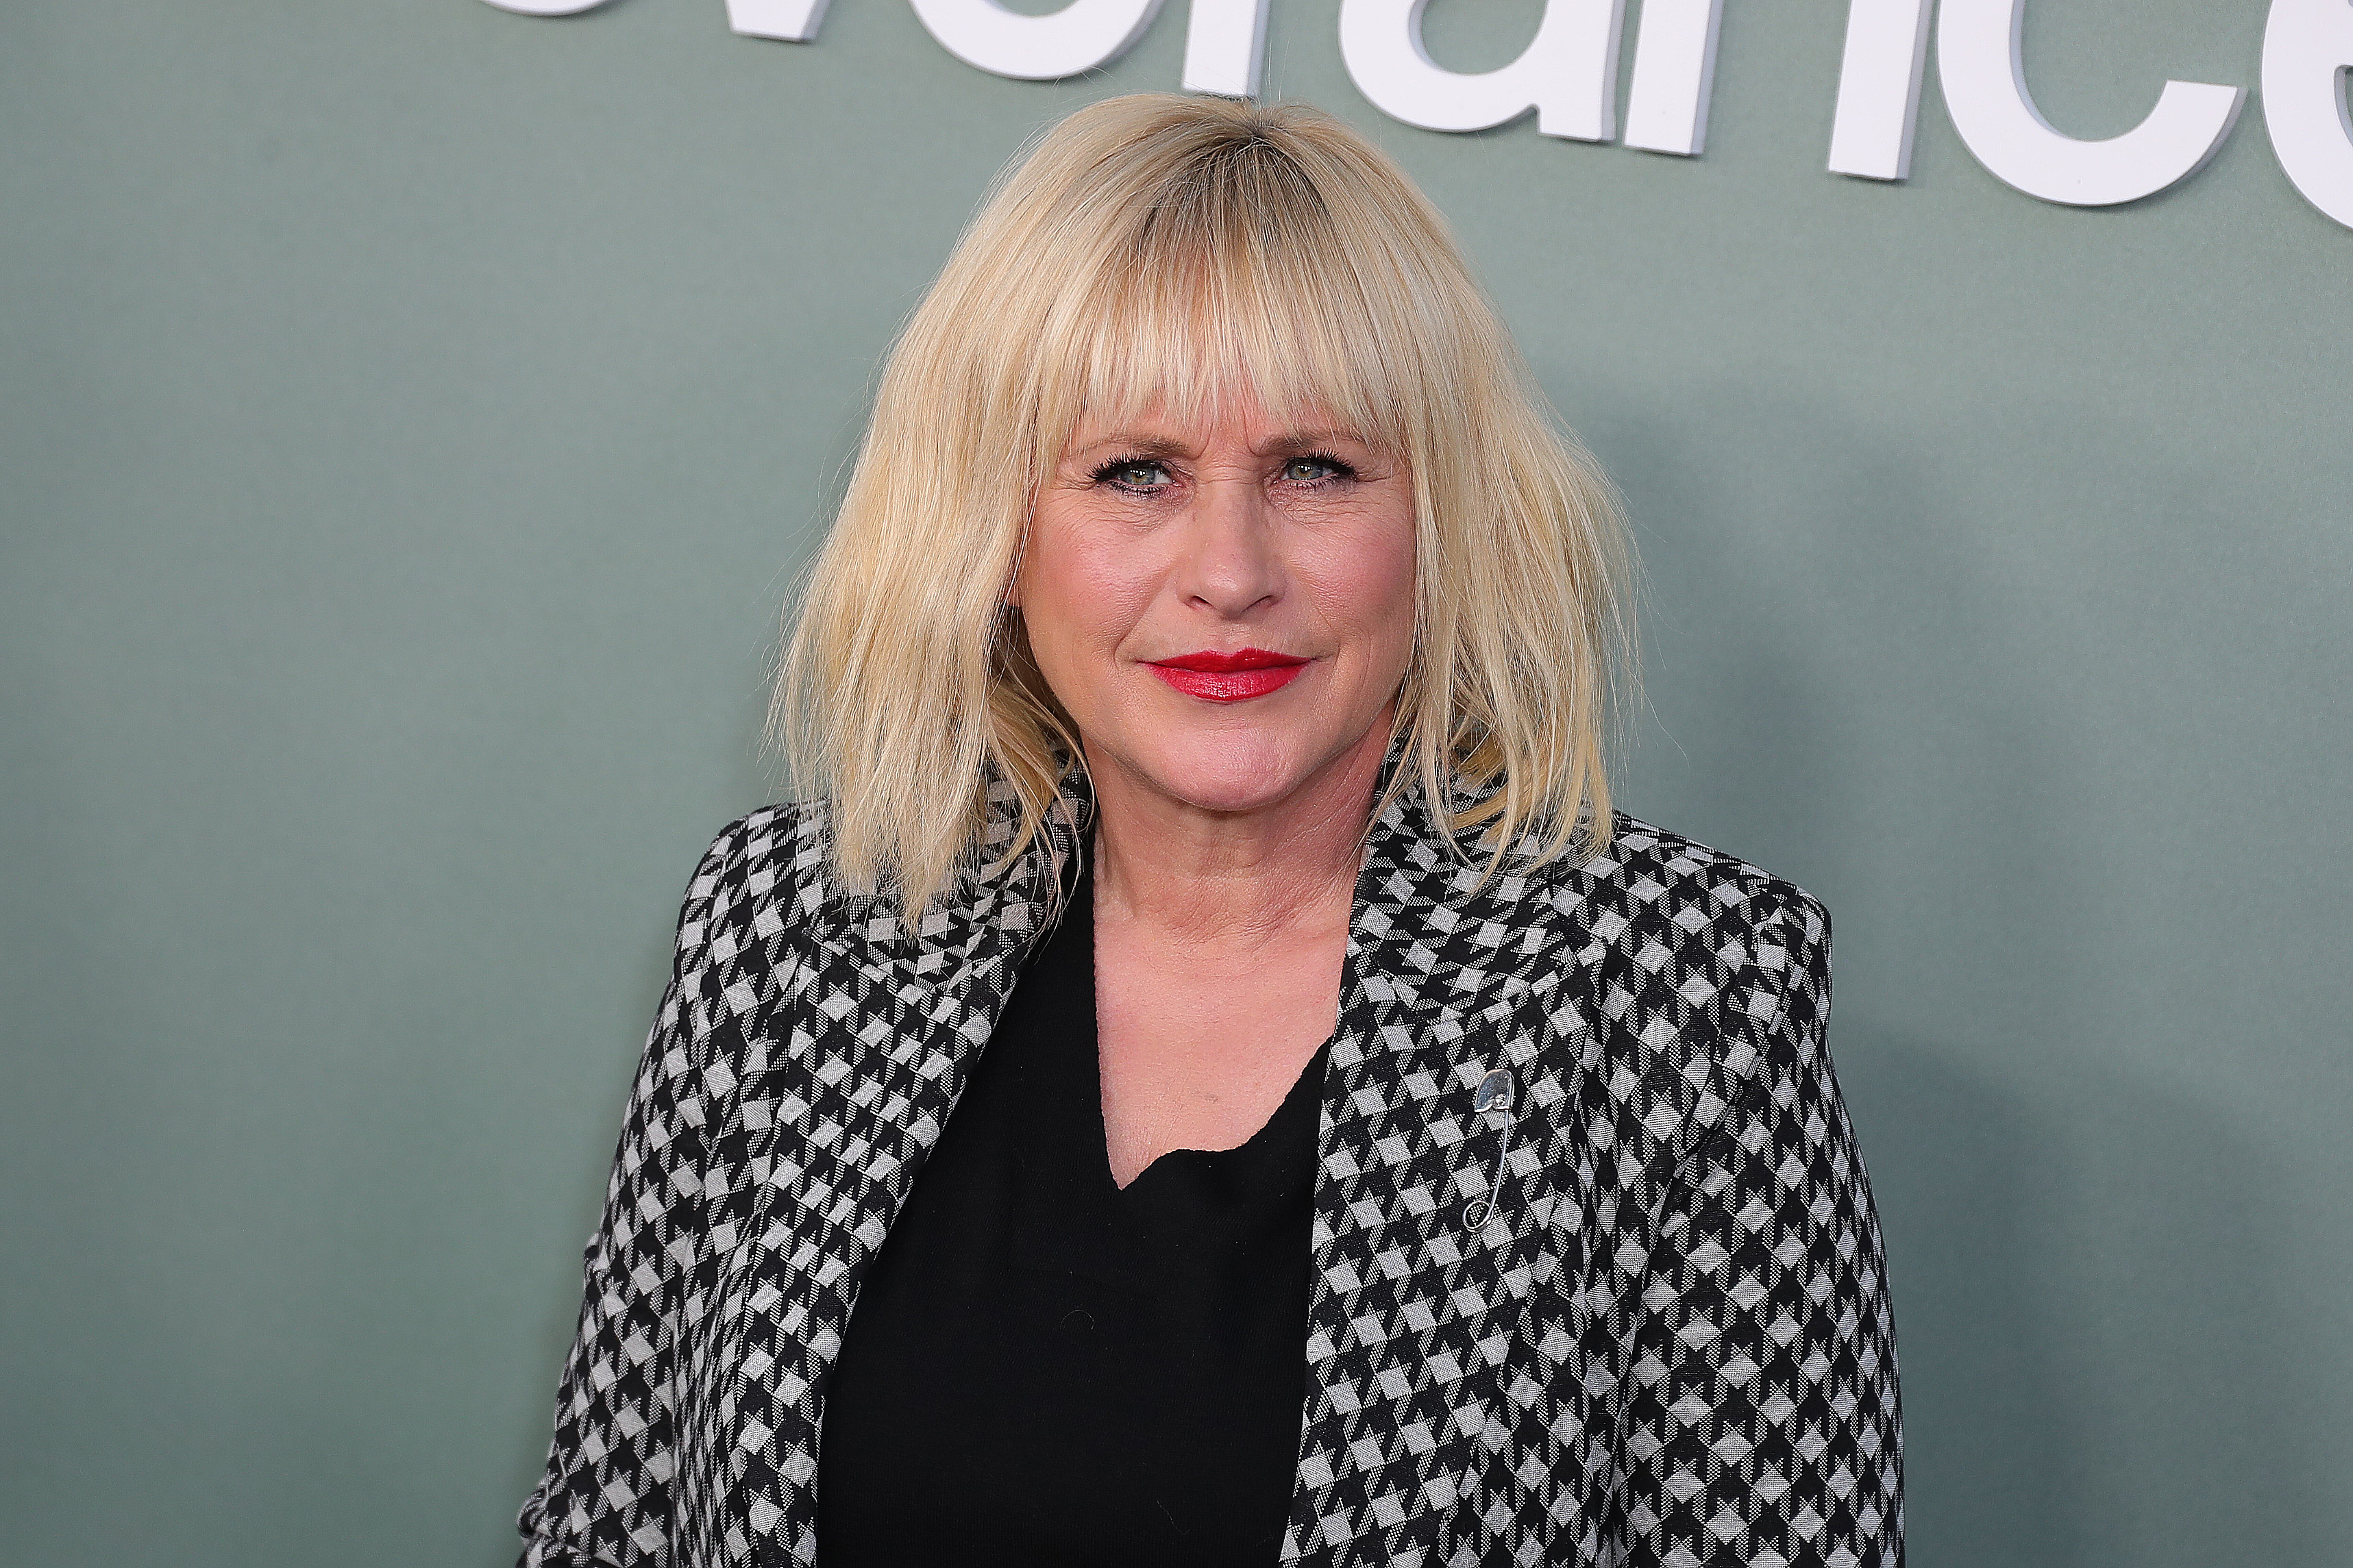 Patricia Arquette at the premiere of Apple TV+'s "Severance" on April 8, 2022, in Los Angeles, California. | Source: Getty Images